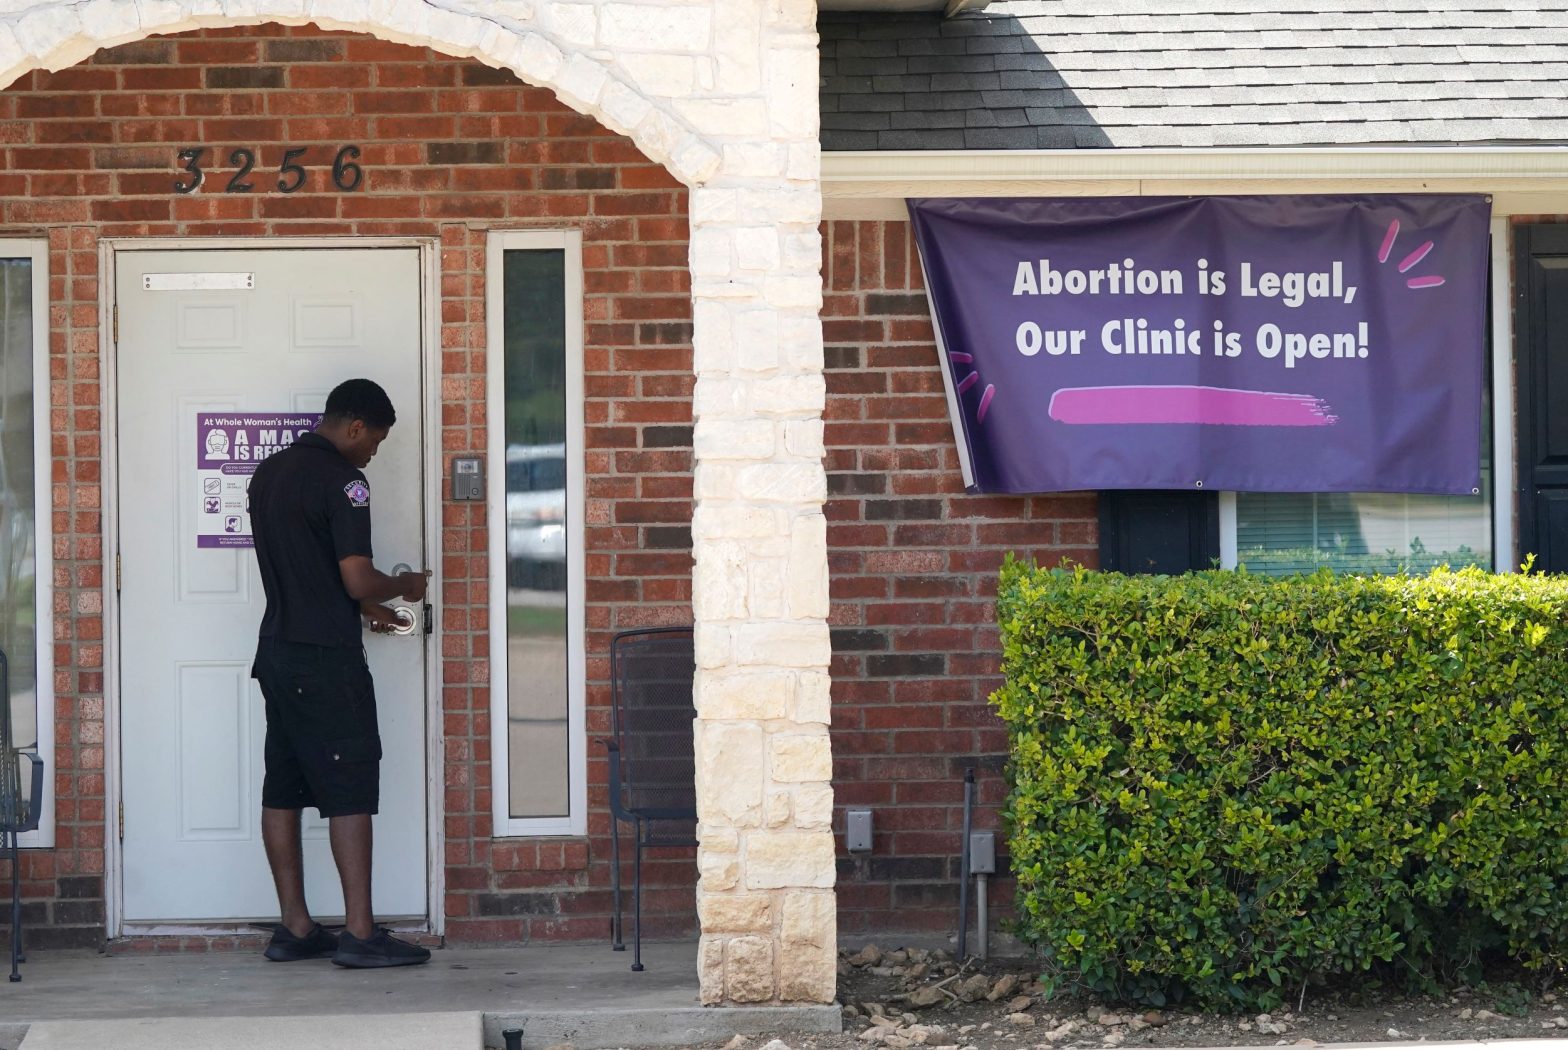 Women’s Clinics Outside of Texas See Surge in Abortion Refugees